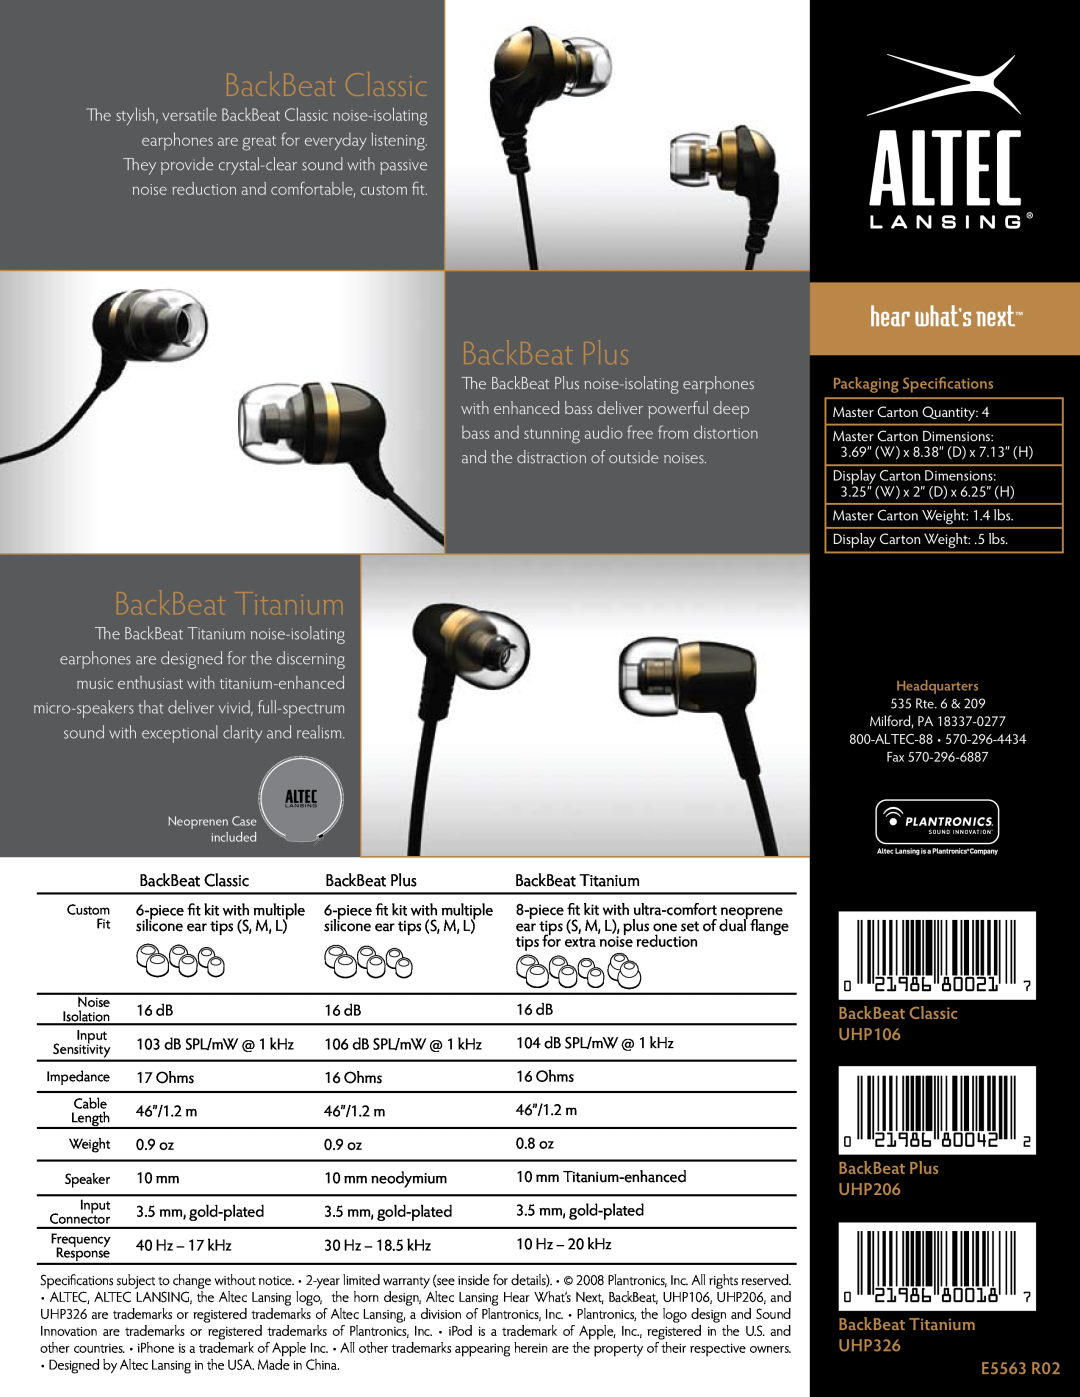 Altec Lansing UHP326 BackBeat Titanium, BackBeat Classic UHP106 BackBeat Plus UHP206, Packaging Specifications 